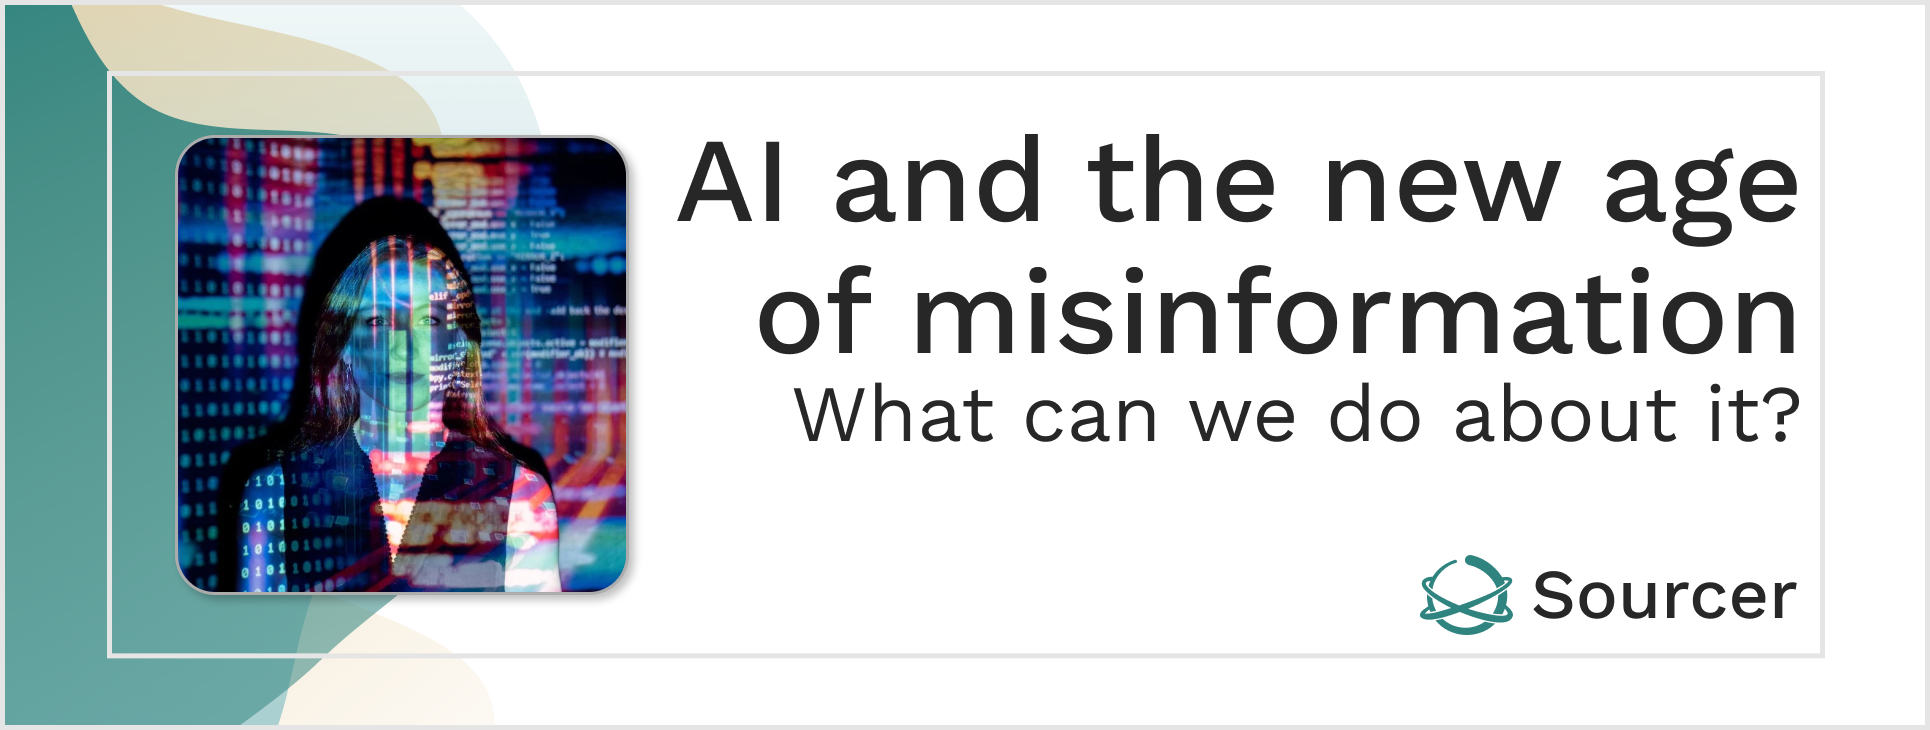 AI and the new age of misinformation. What can we do about it?-image